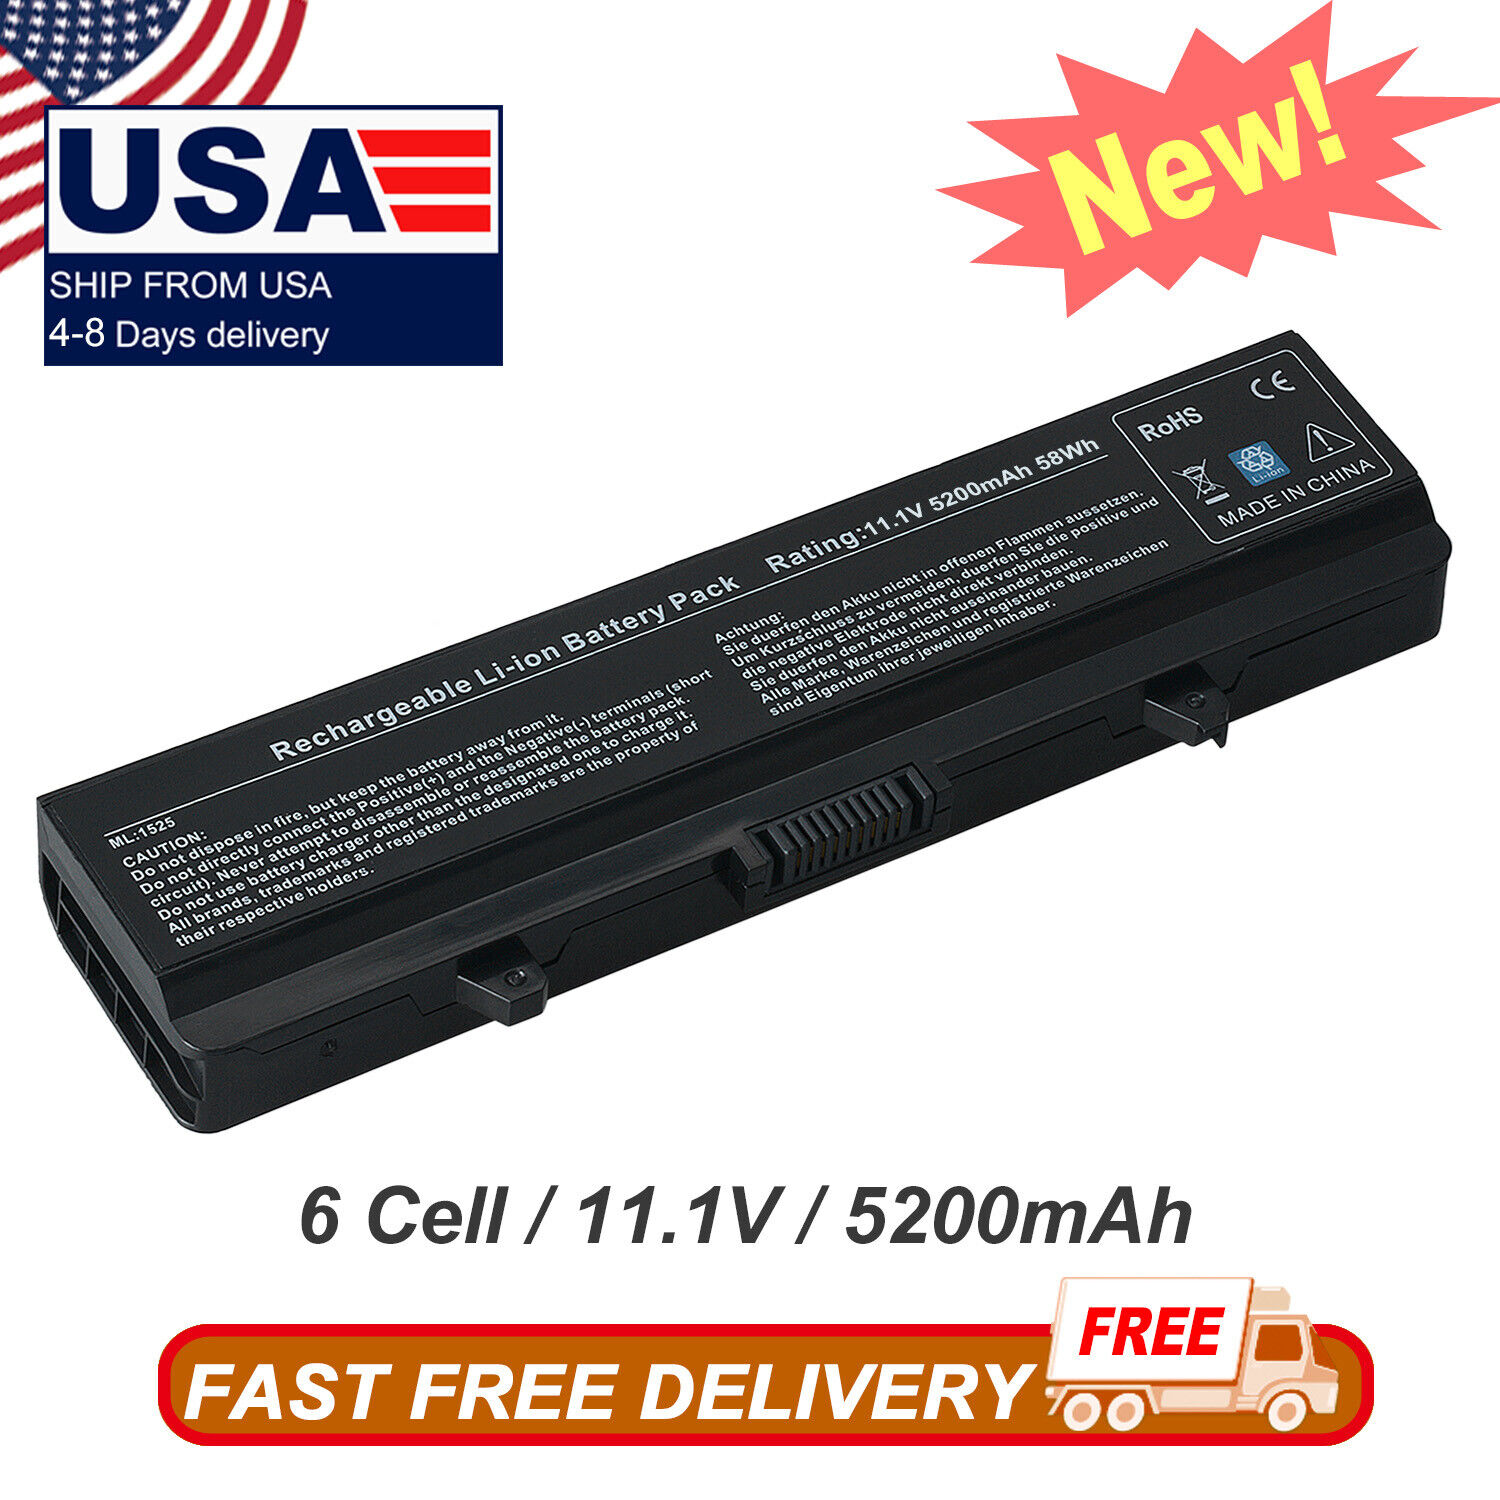 6Cell Laptop Battery for Dell Inspiron 1525 1526 1440 1545 1546 1750 GW240 X284G